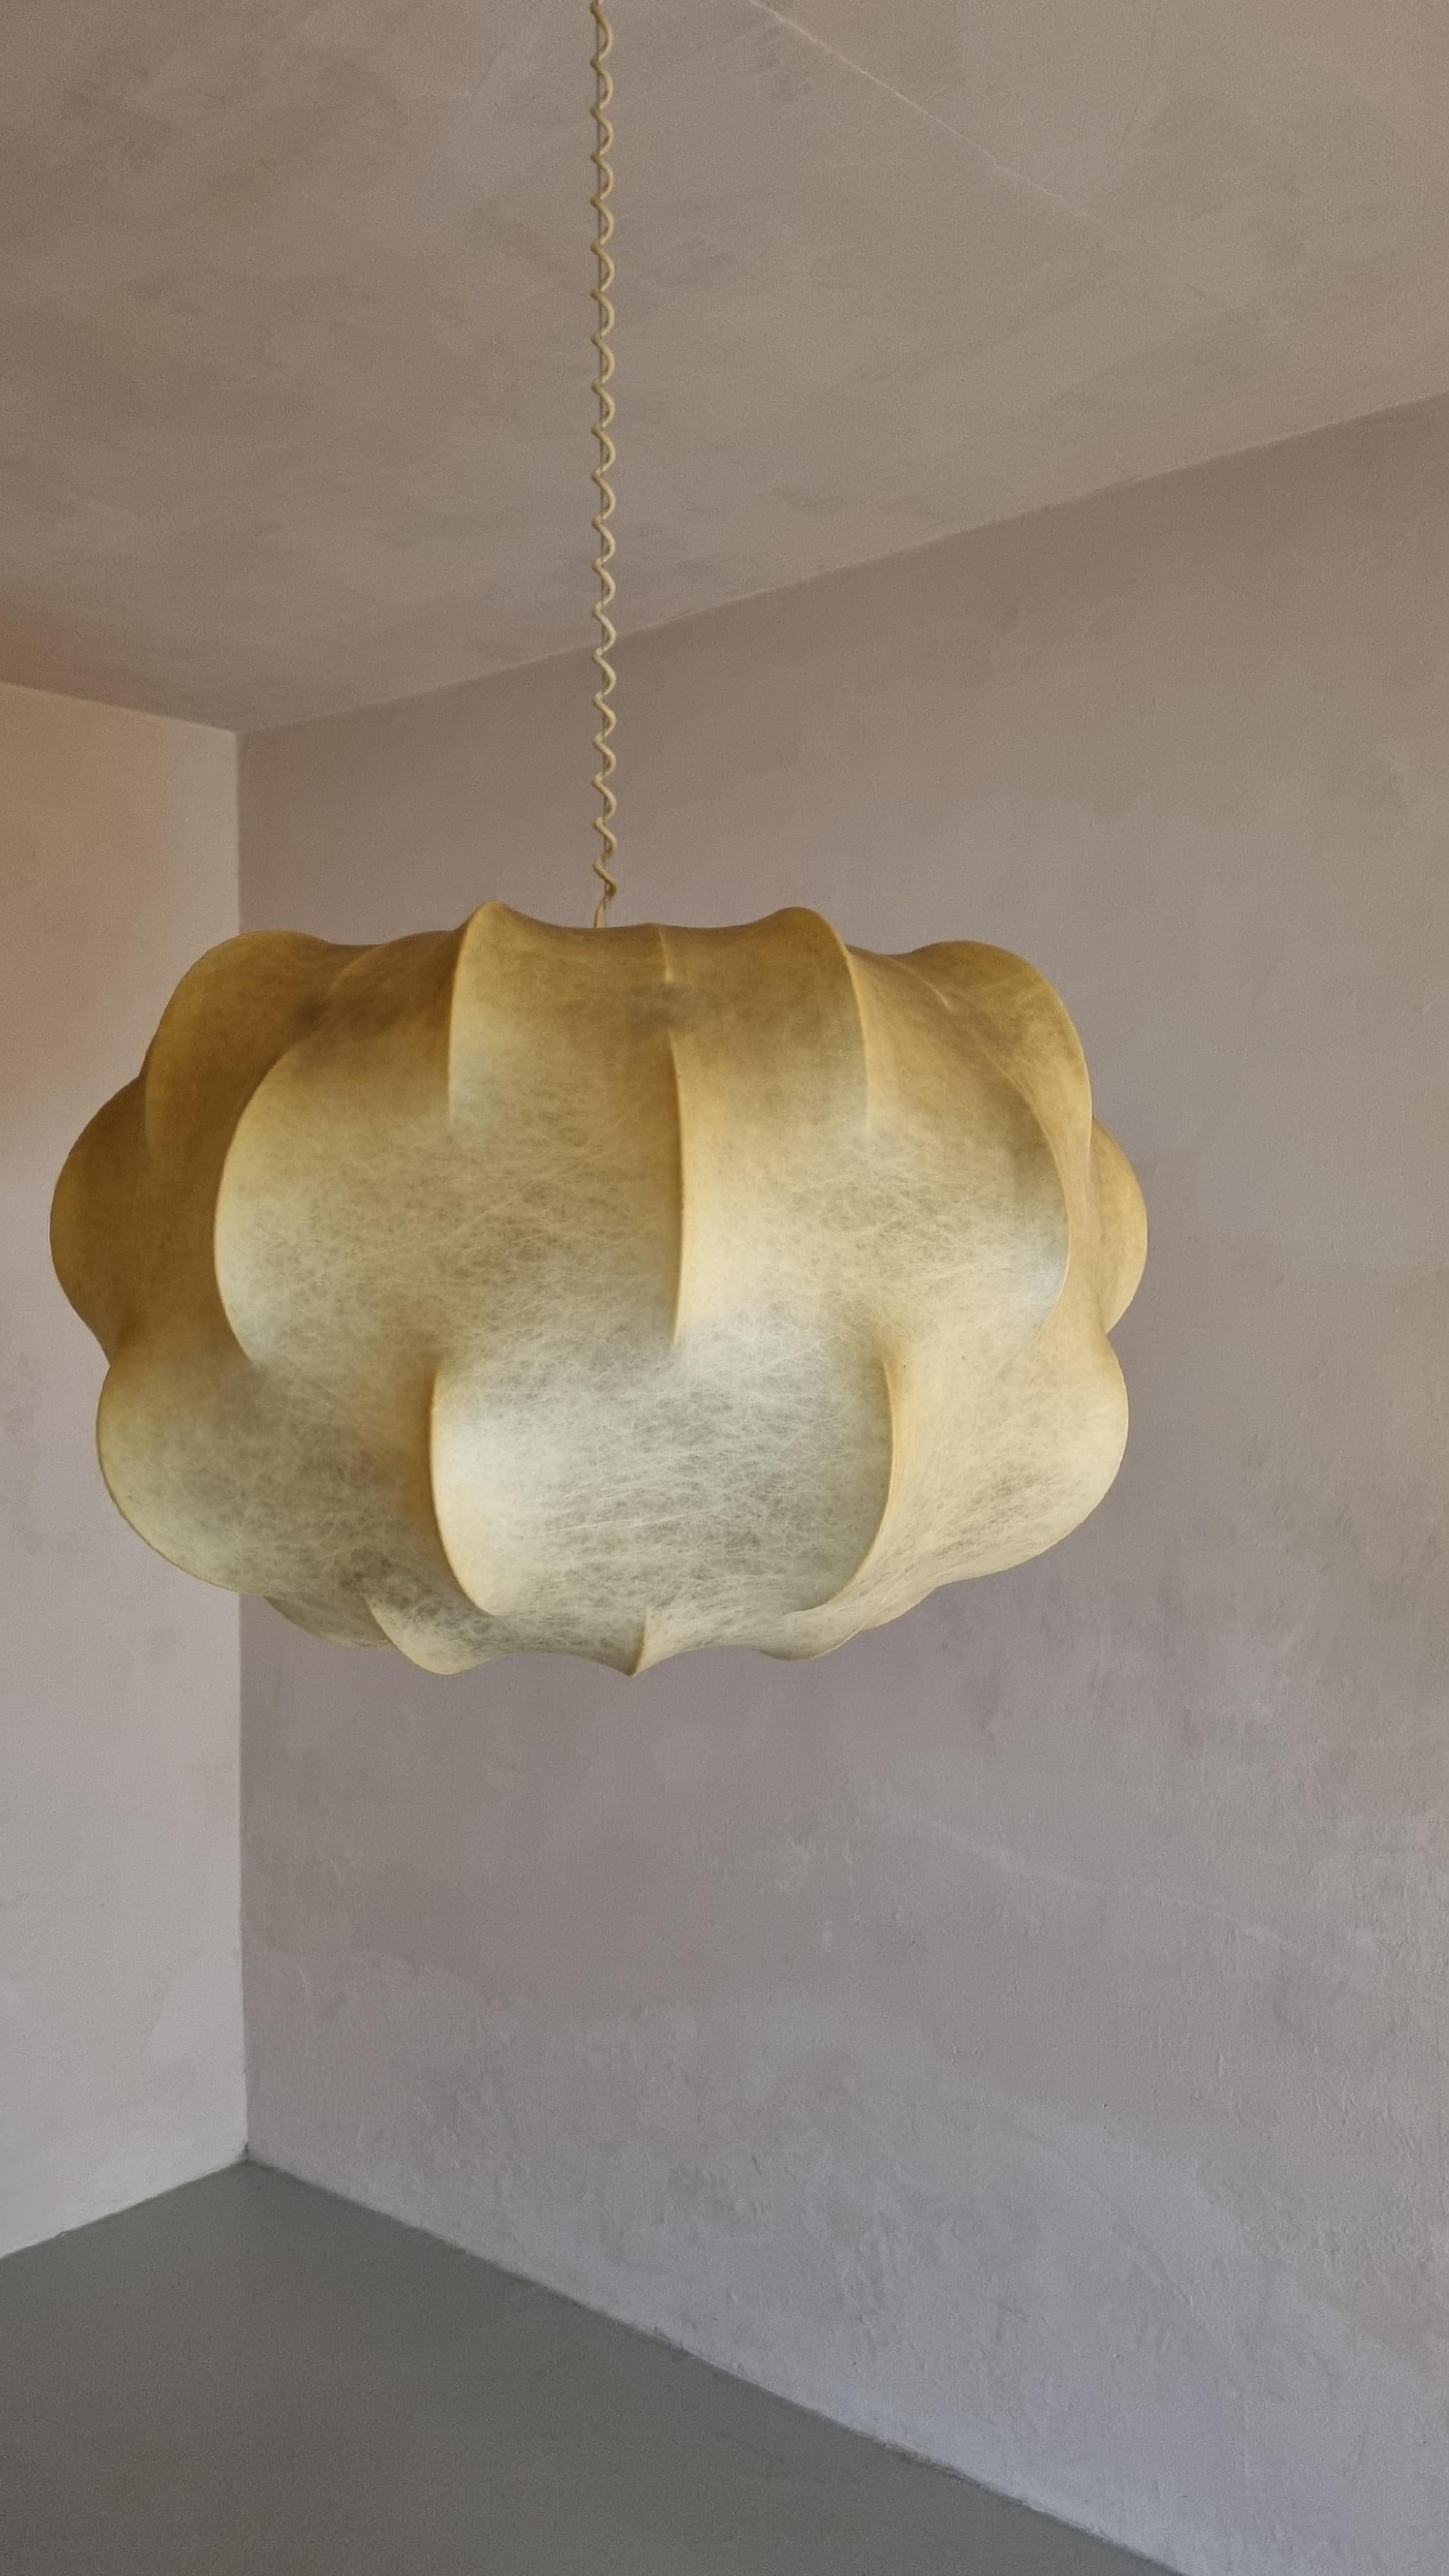 Italian Nuvola ceiling lamp by Tobia Scarpa for Flos 1963